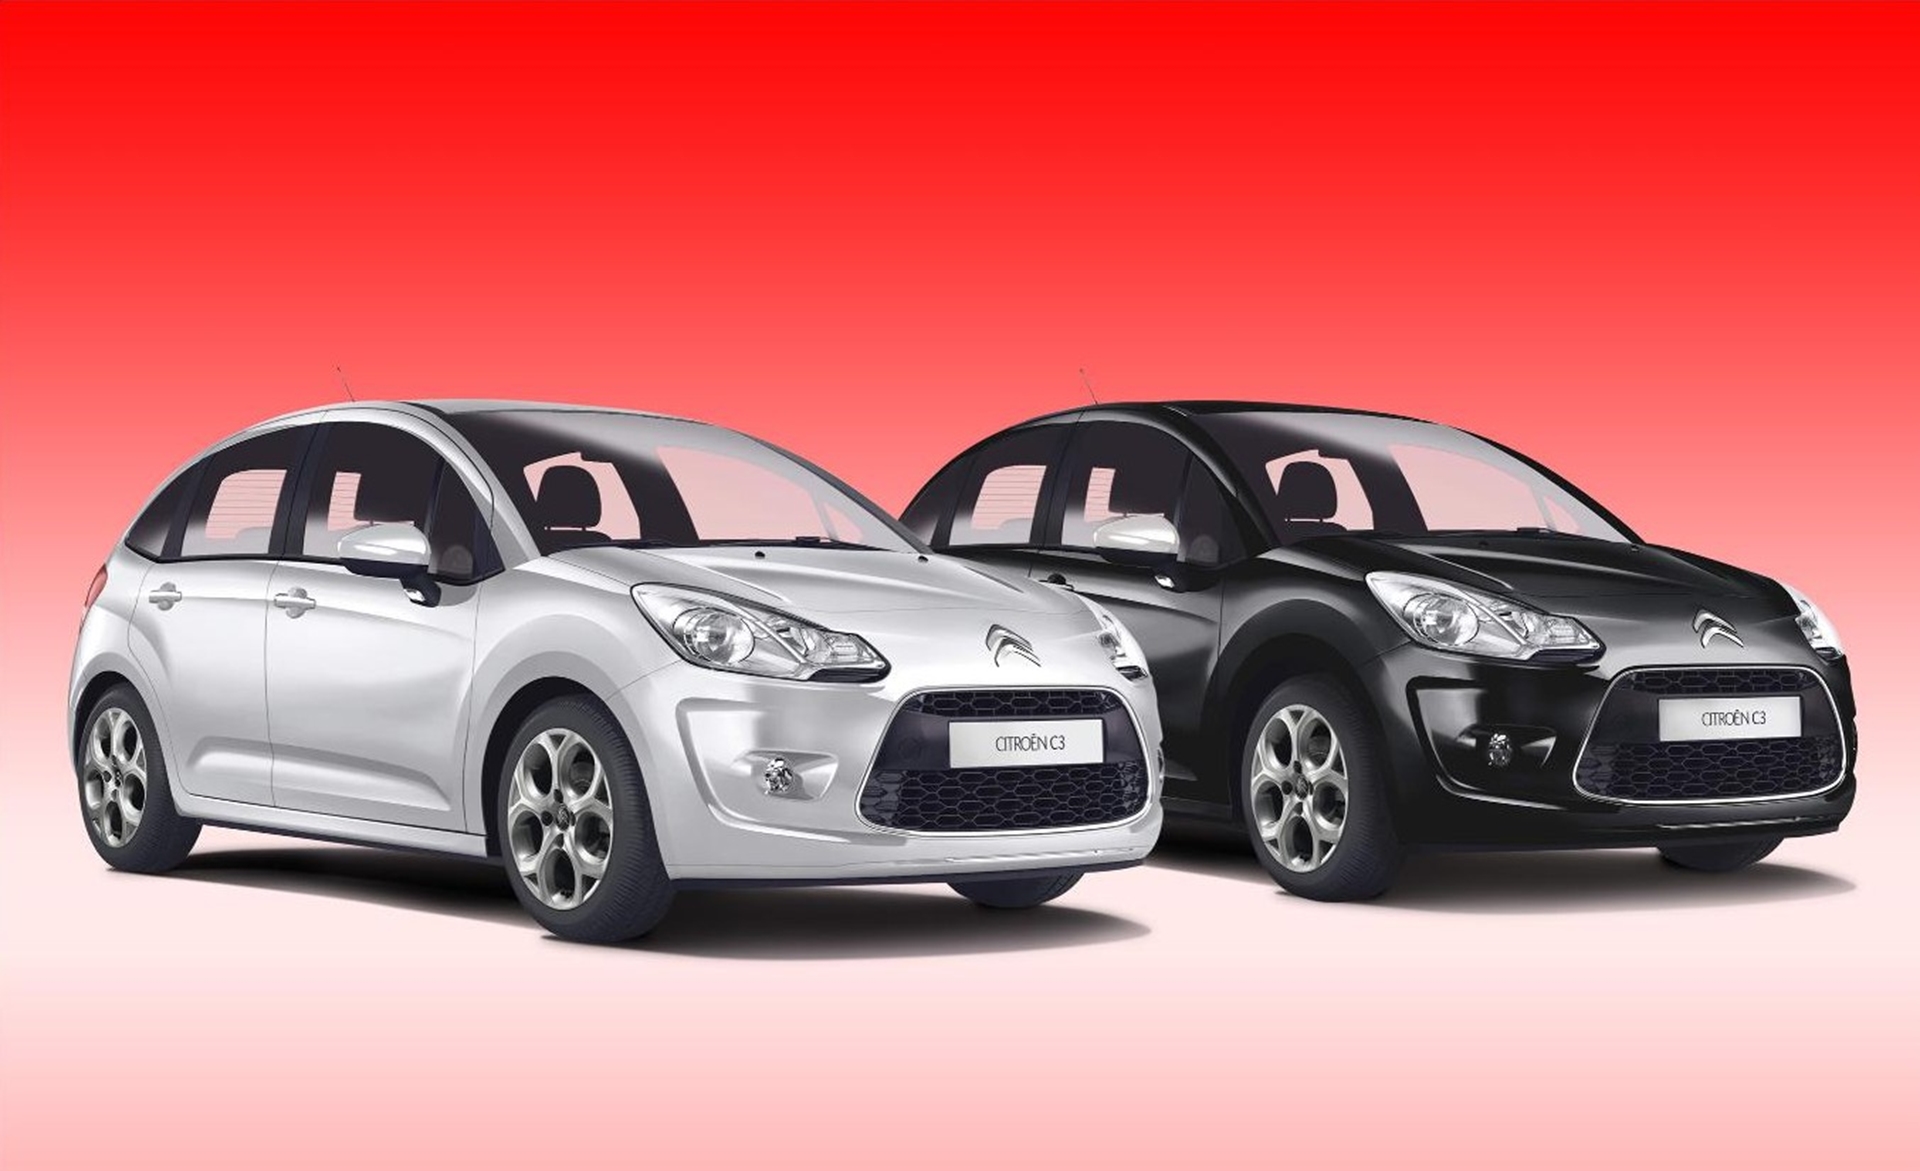 CITROEN INTRODUCES TWO NEW SPECIAL EDITIONS FOR THE NEW YEAR